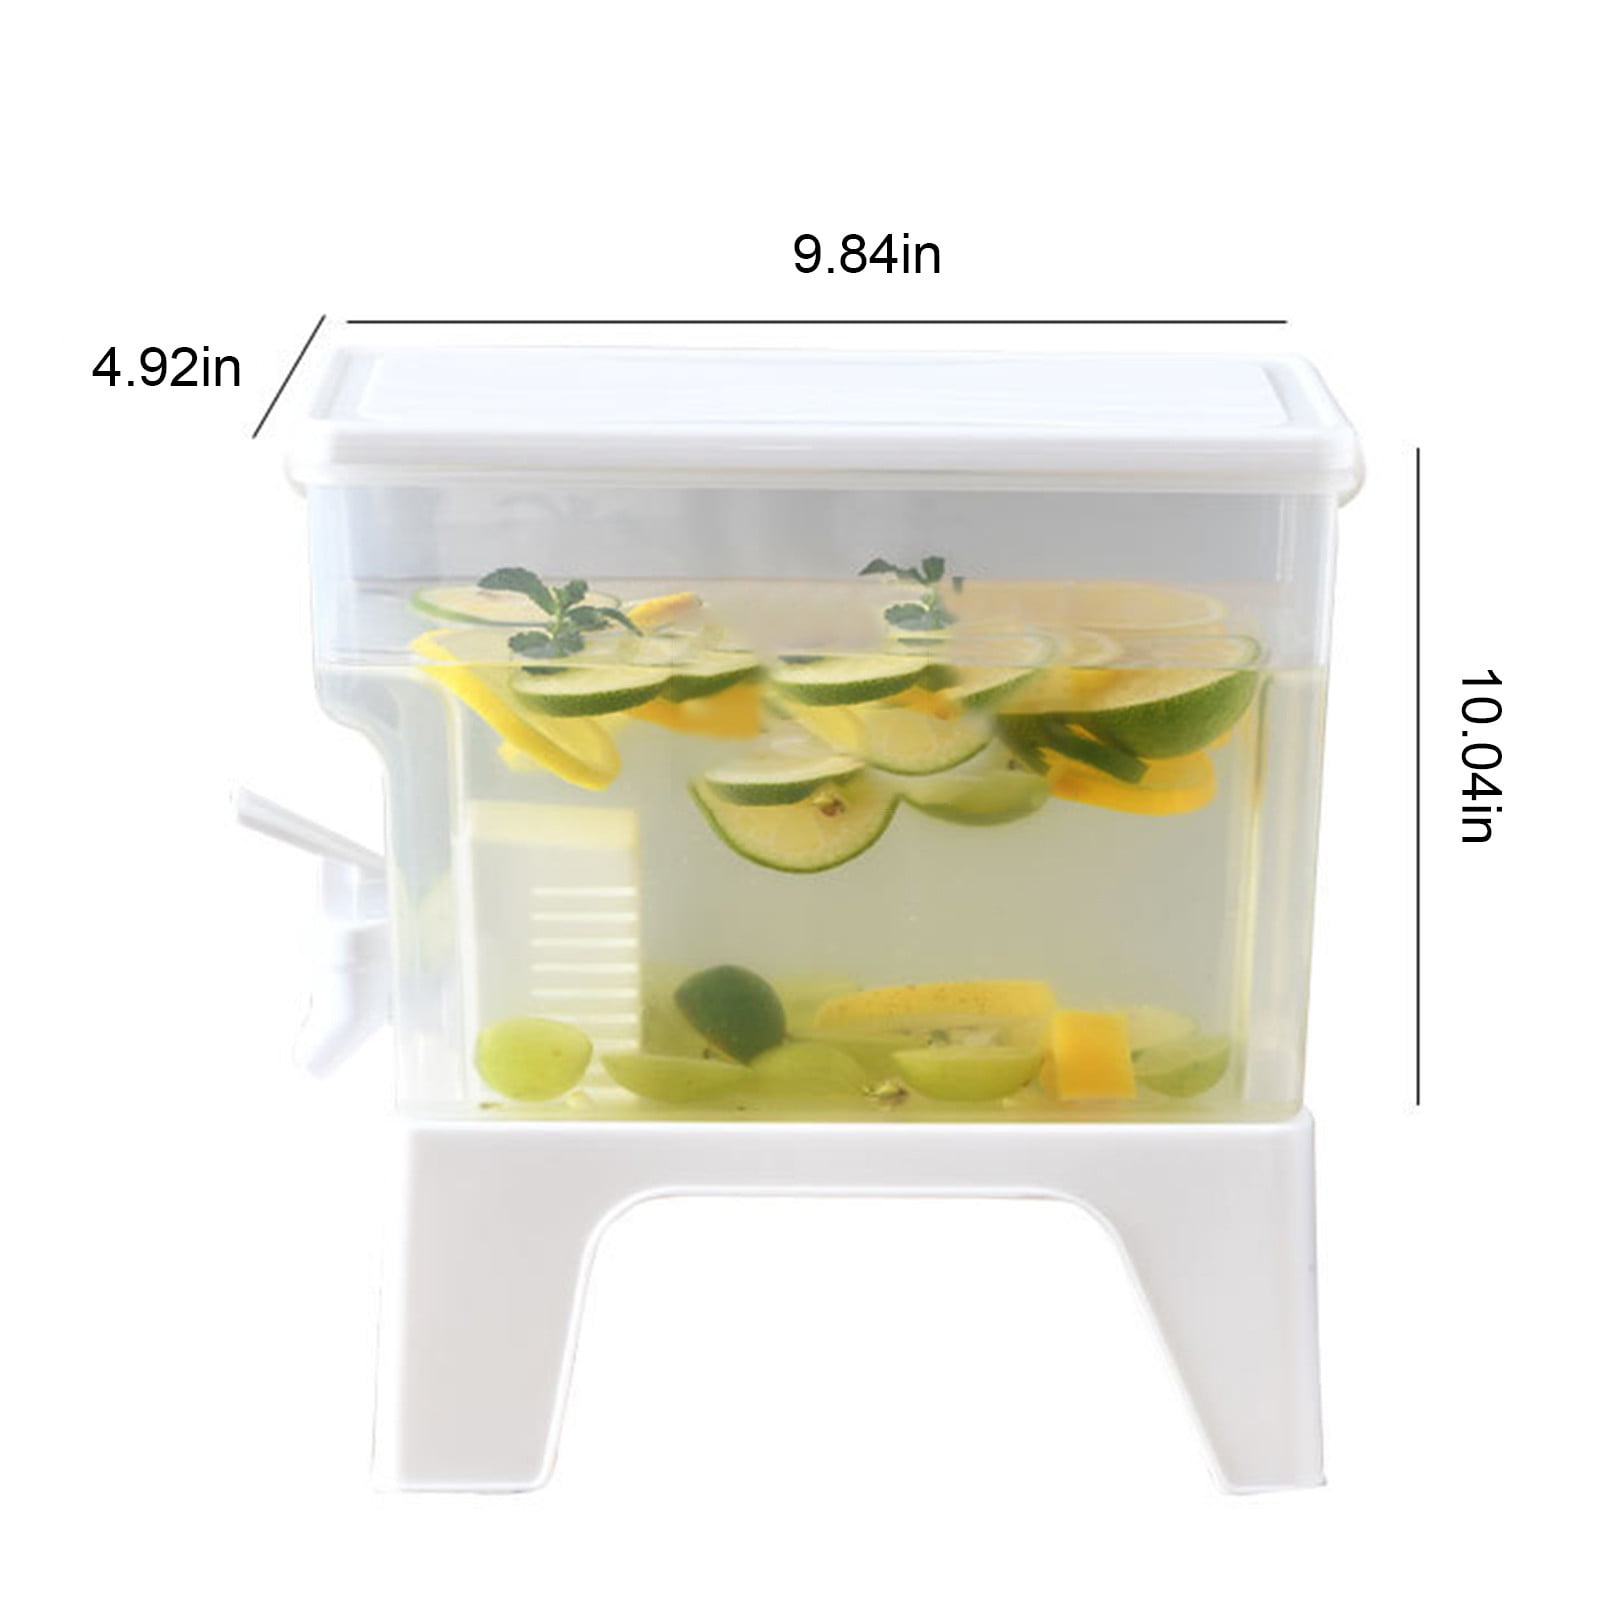 KWQBHW Beverage Dispenser with Spigot Rotate 360 Degrees Drink Dispenser  for Parties 4 Compartment Refrigerator Ice Fruit Juice Lemonade Container